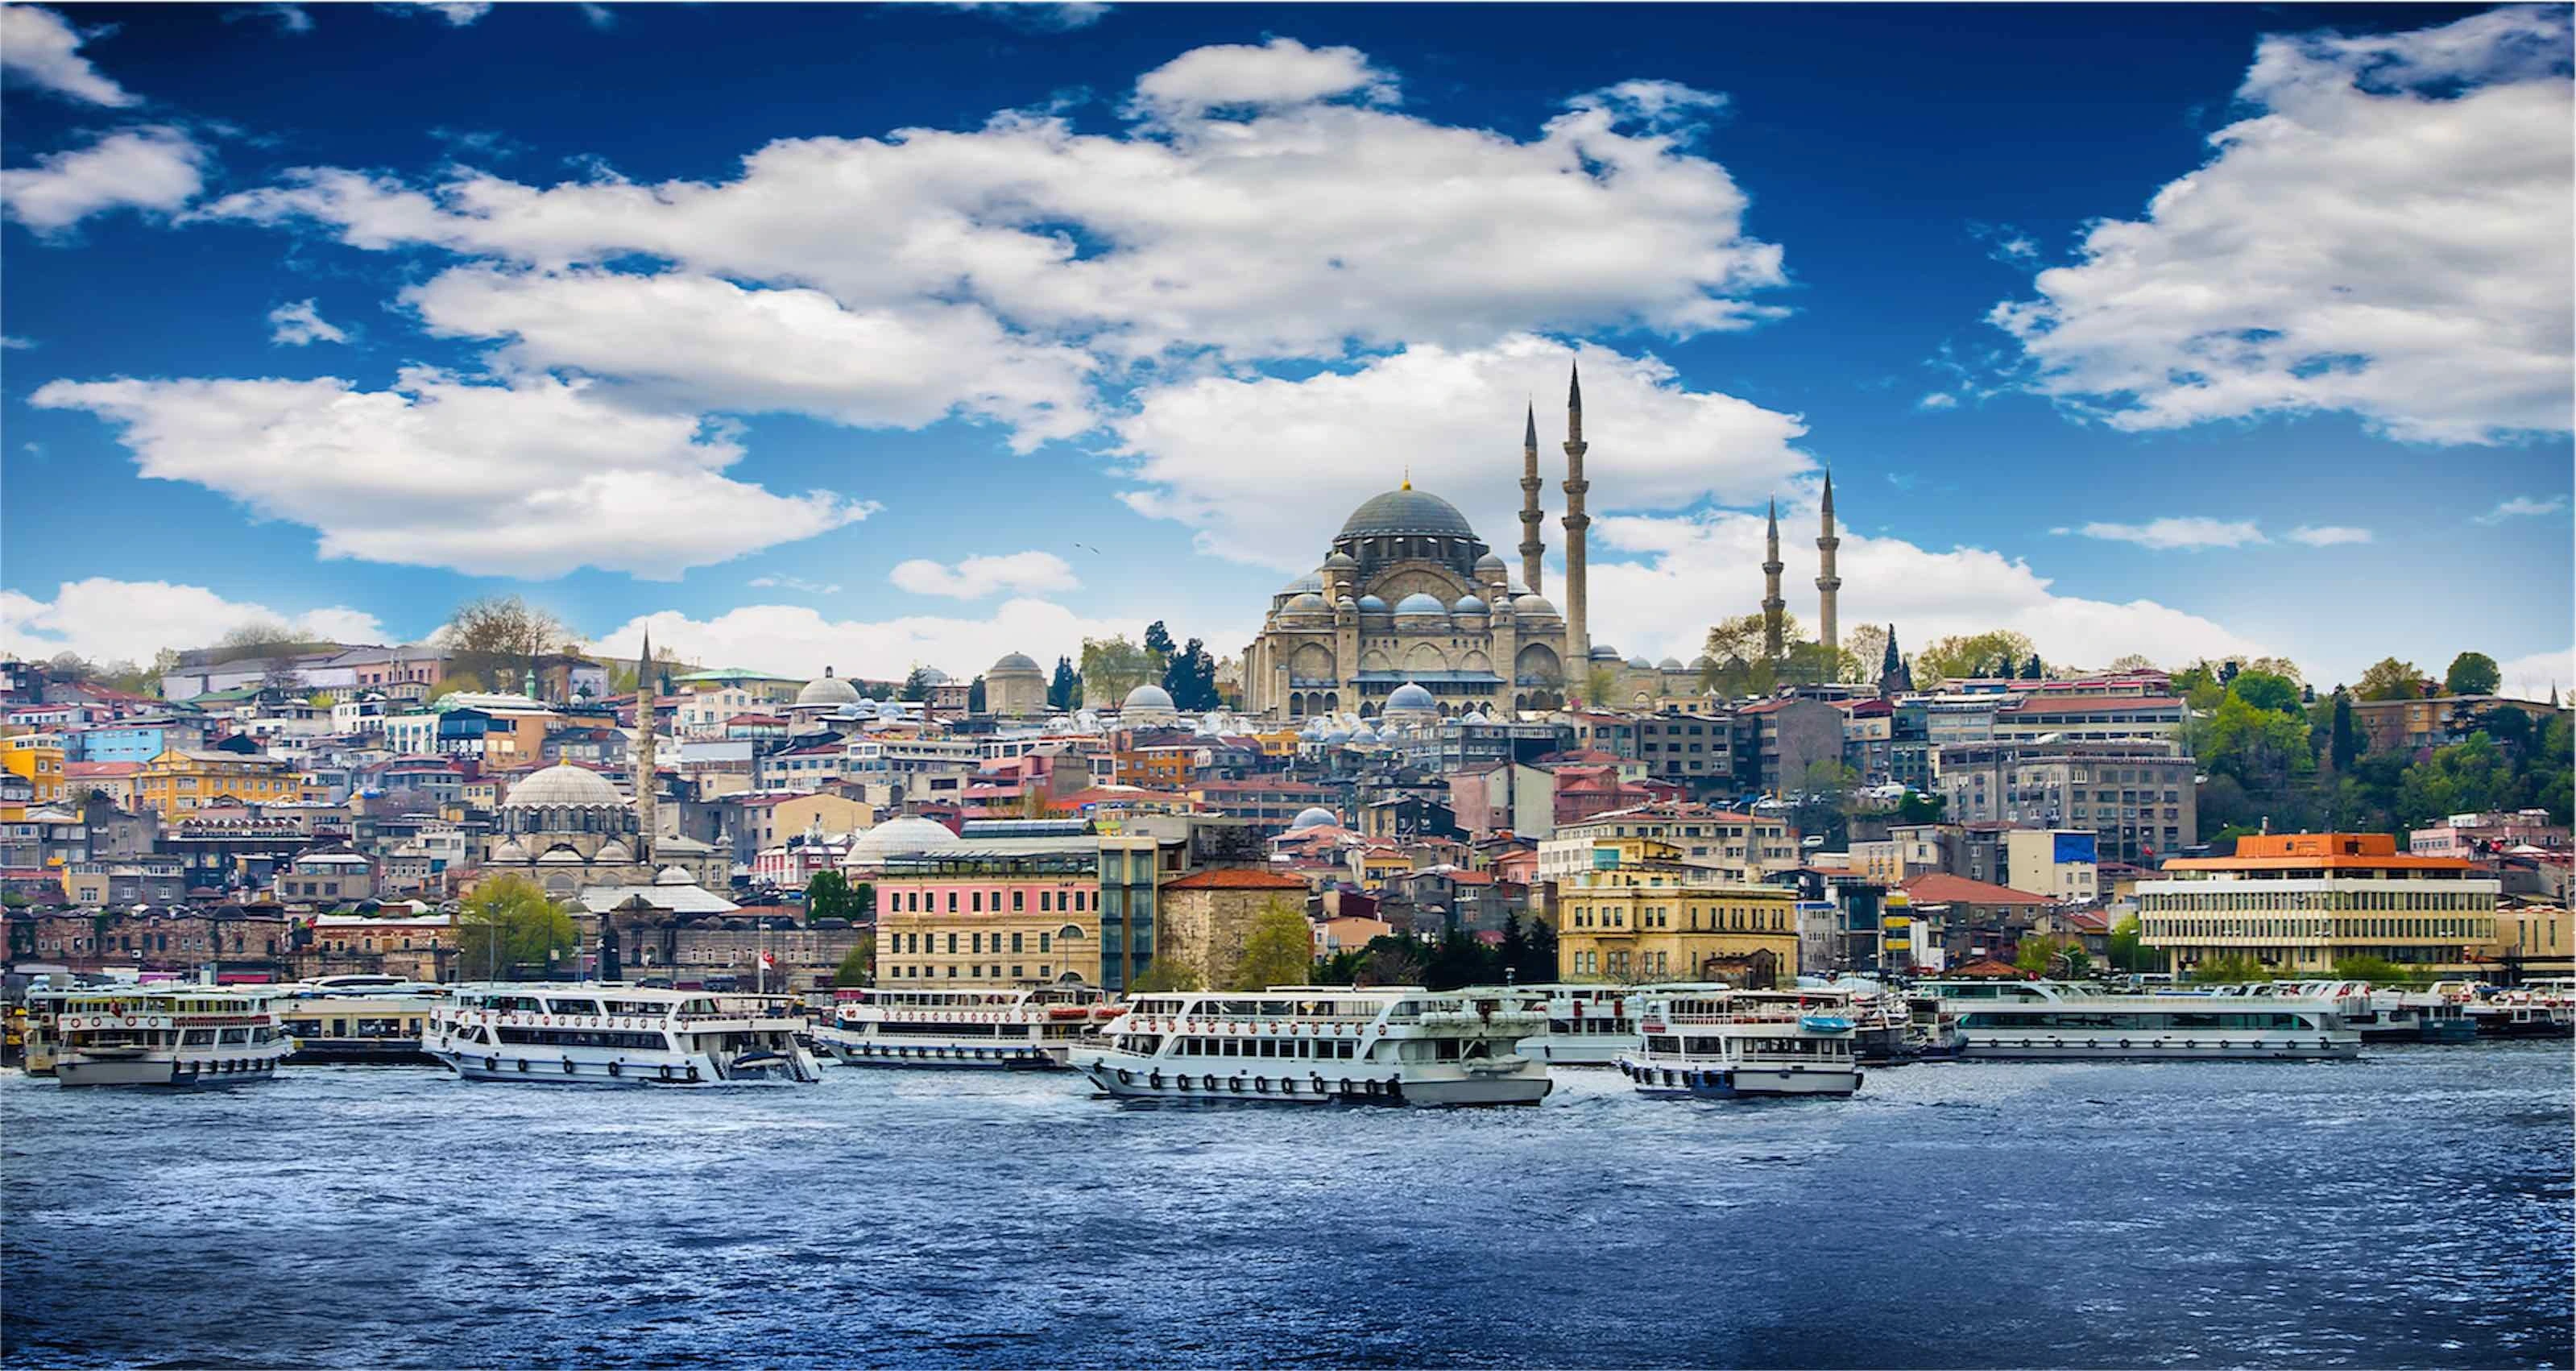 Istanbul Travel Guide